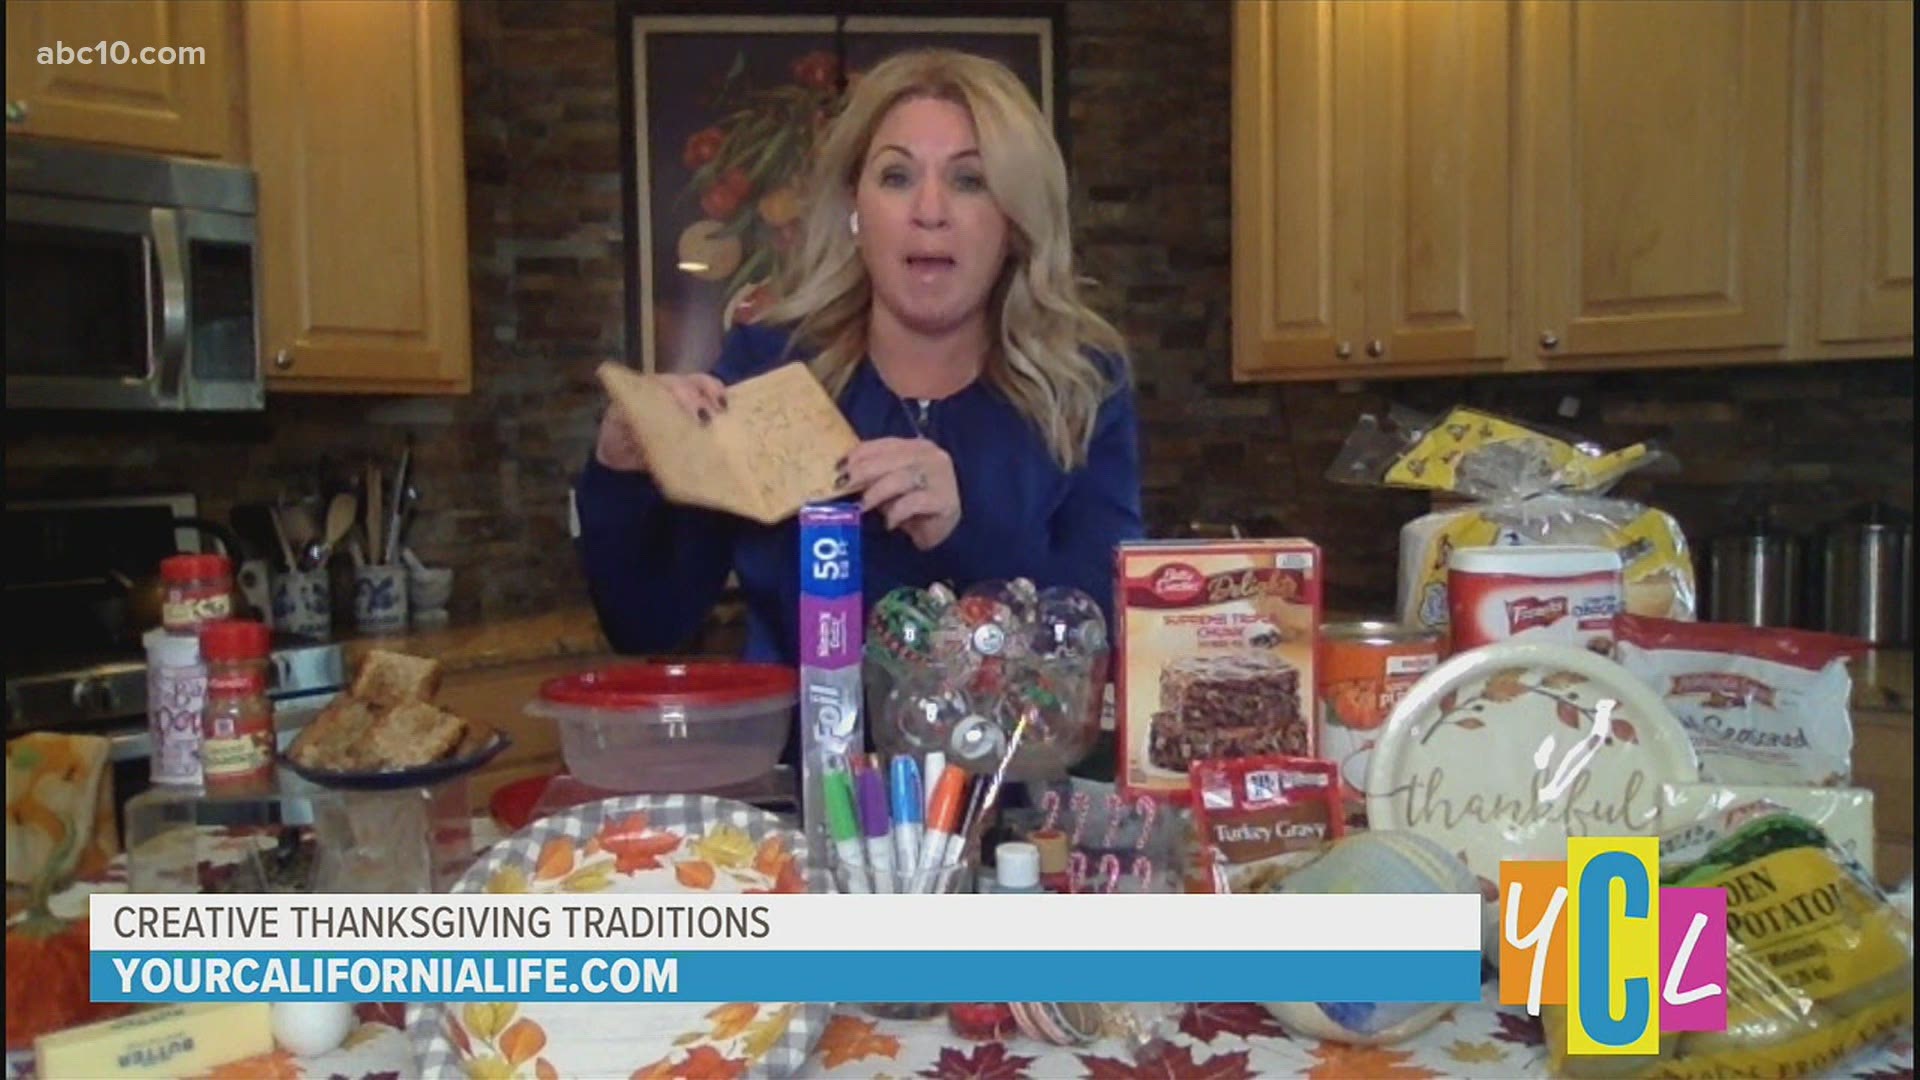 Lifestyle and parenting expert Sherri French shows us ways to remember family traditions while also embracing new ones that can create memories for future holidays.